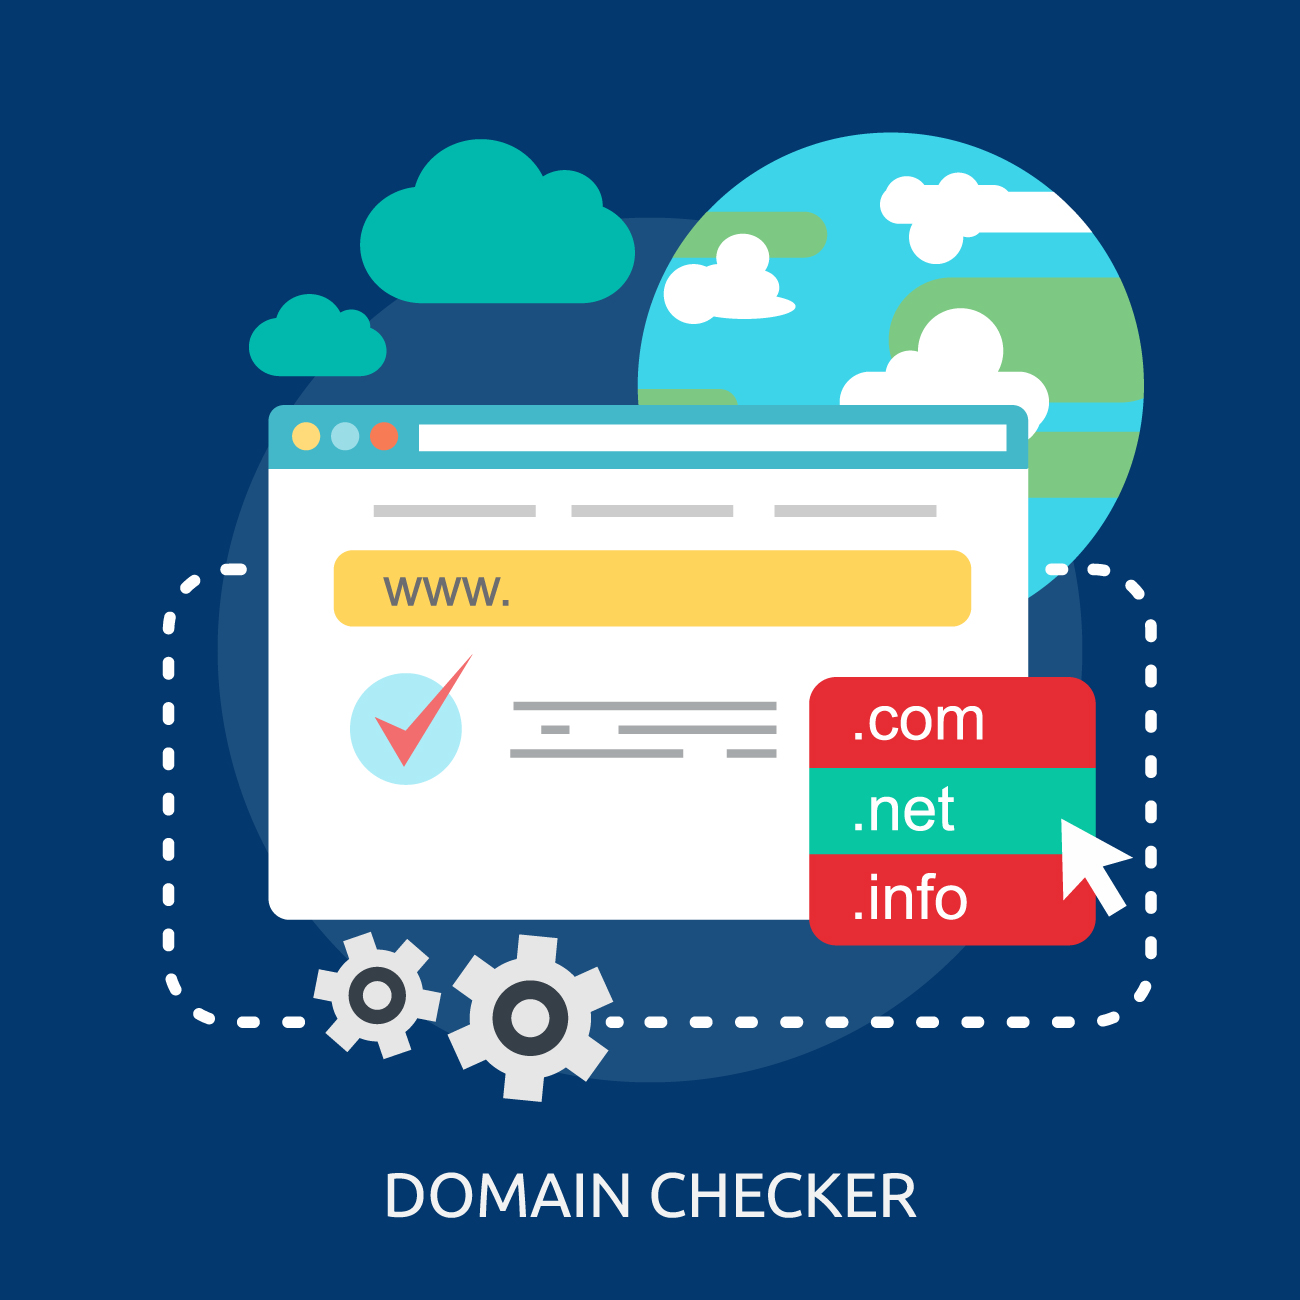 An illustration of a domain name checker, with a globe, web browser window and more.